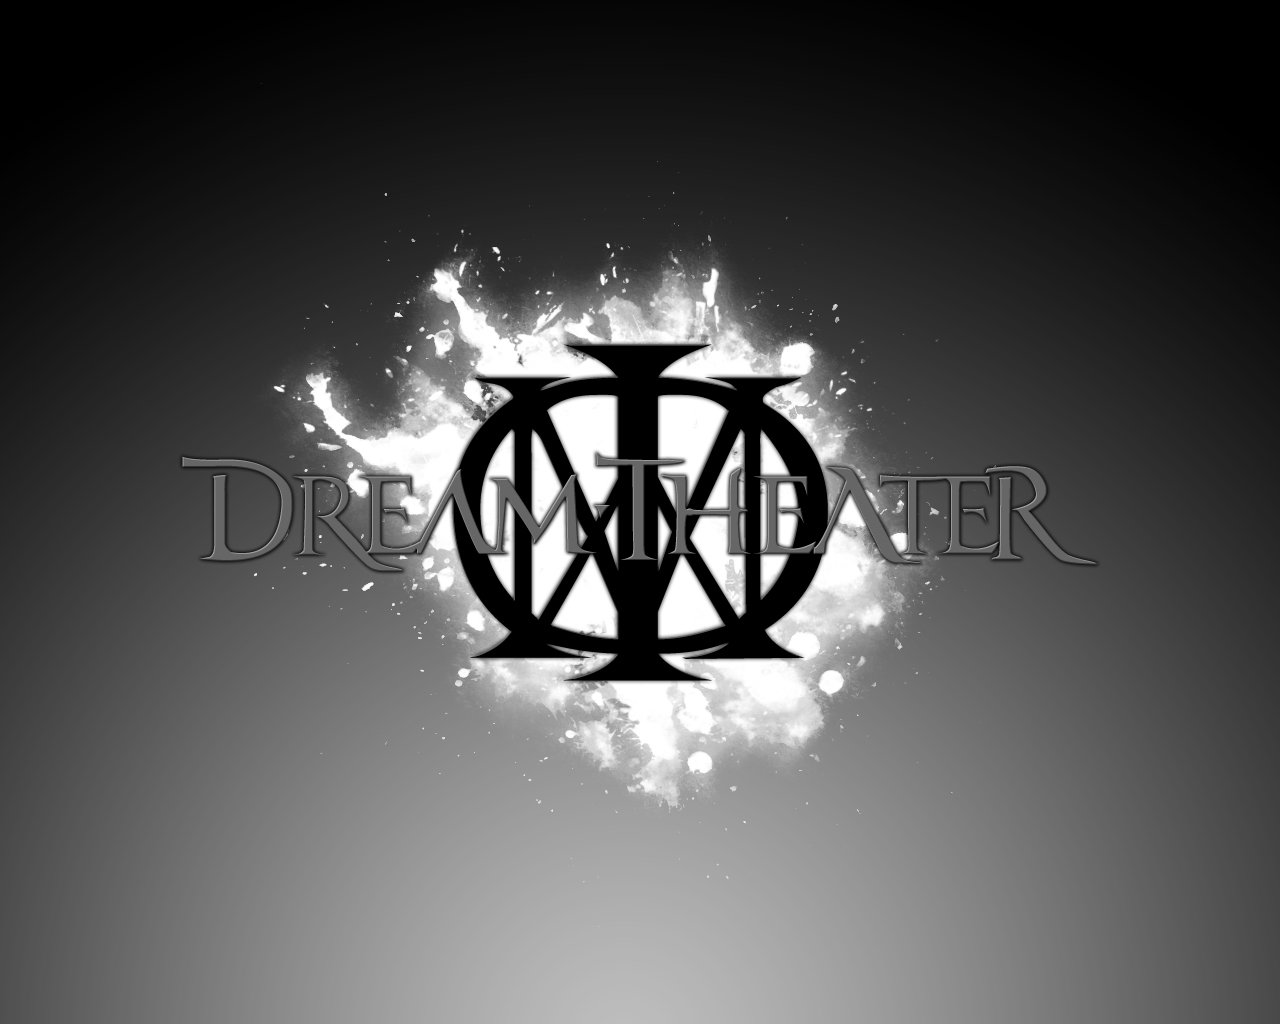 Download Hd 1280x1024 Dream Theater PC Wallpaper ID401223 For Free